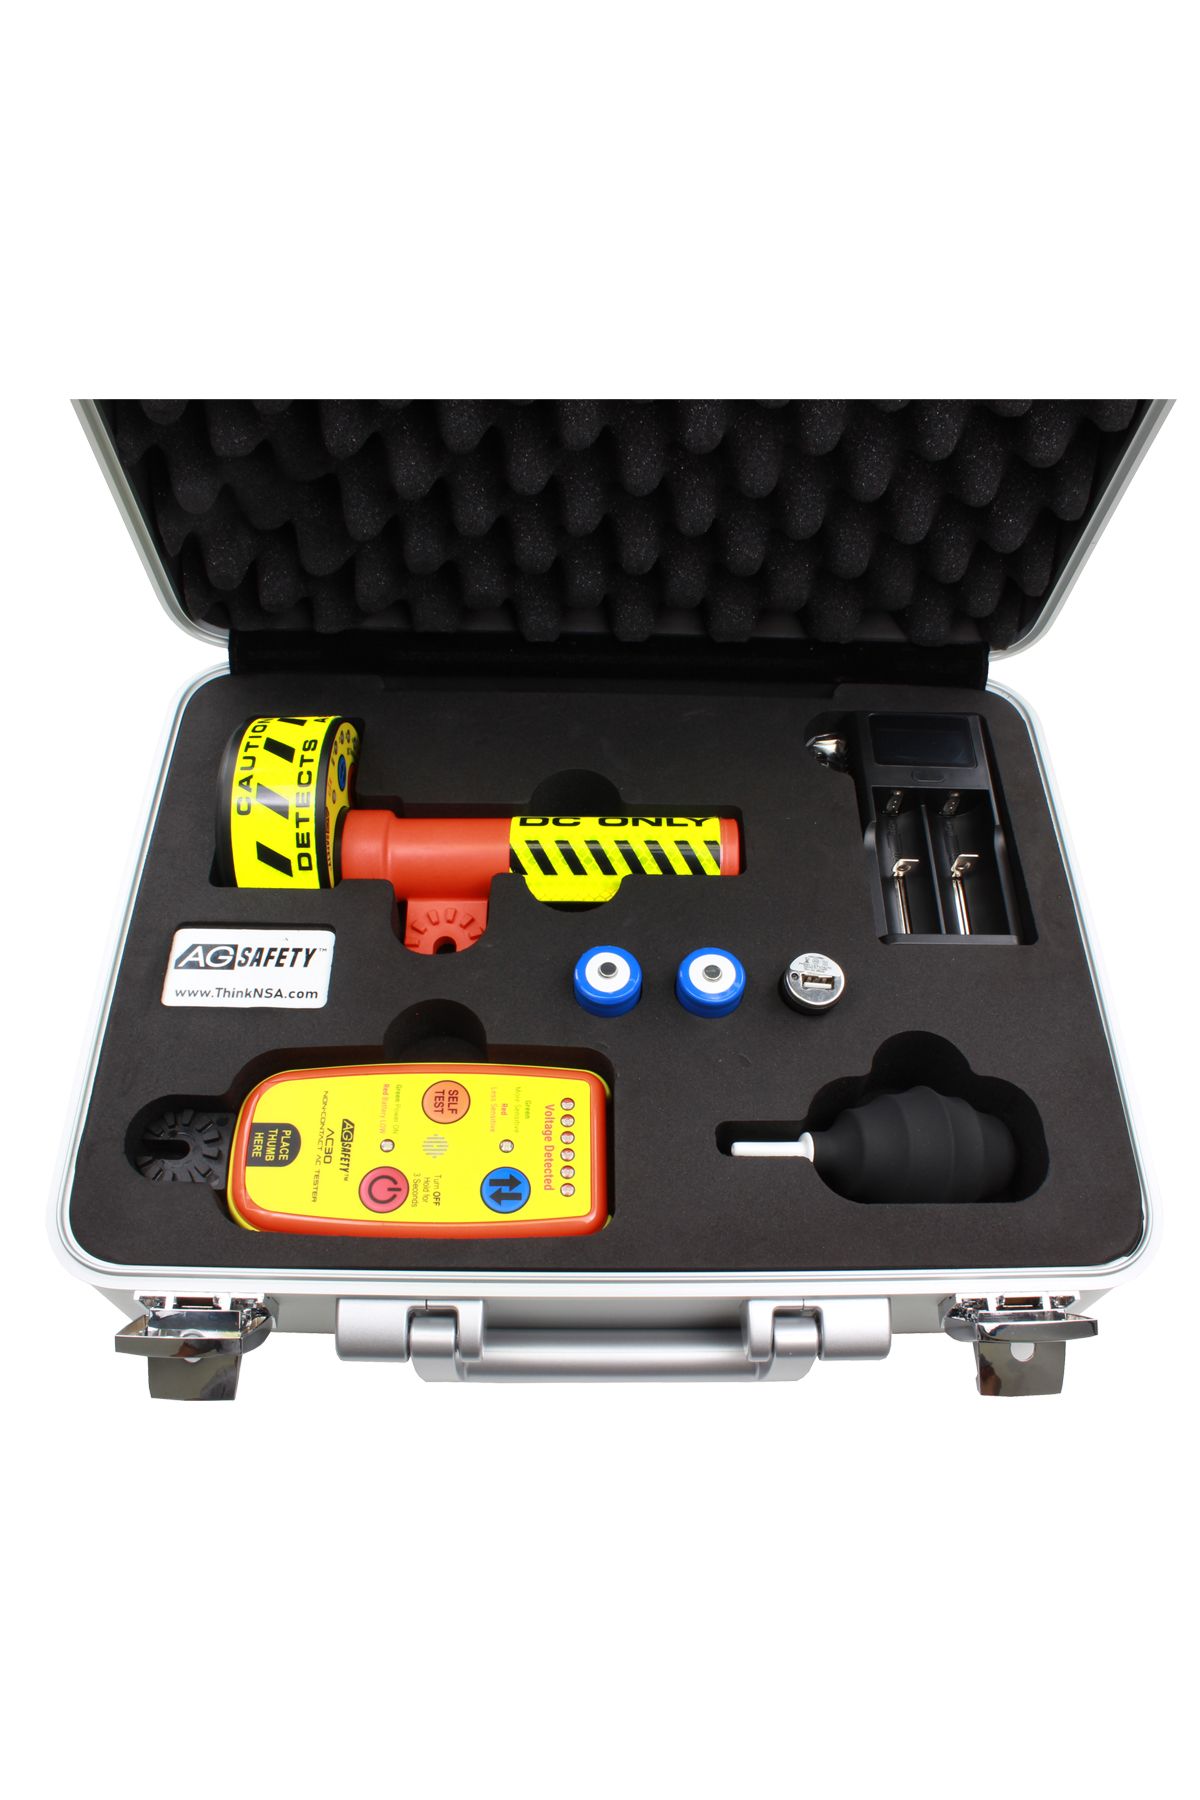 AG Safety ACDC Voltage Detector Kit